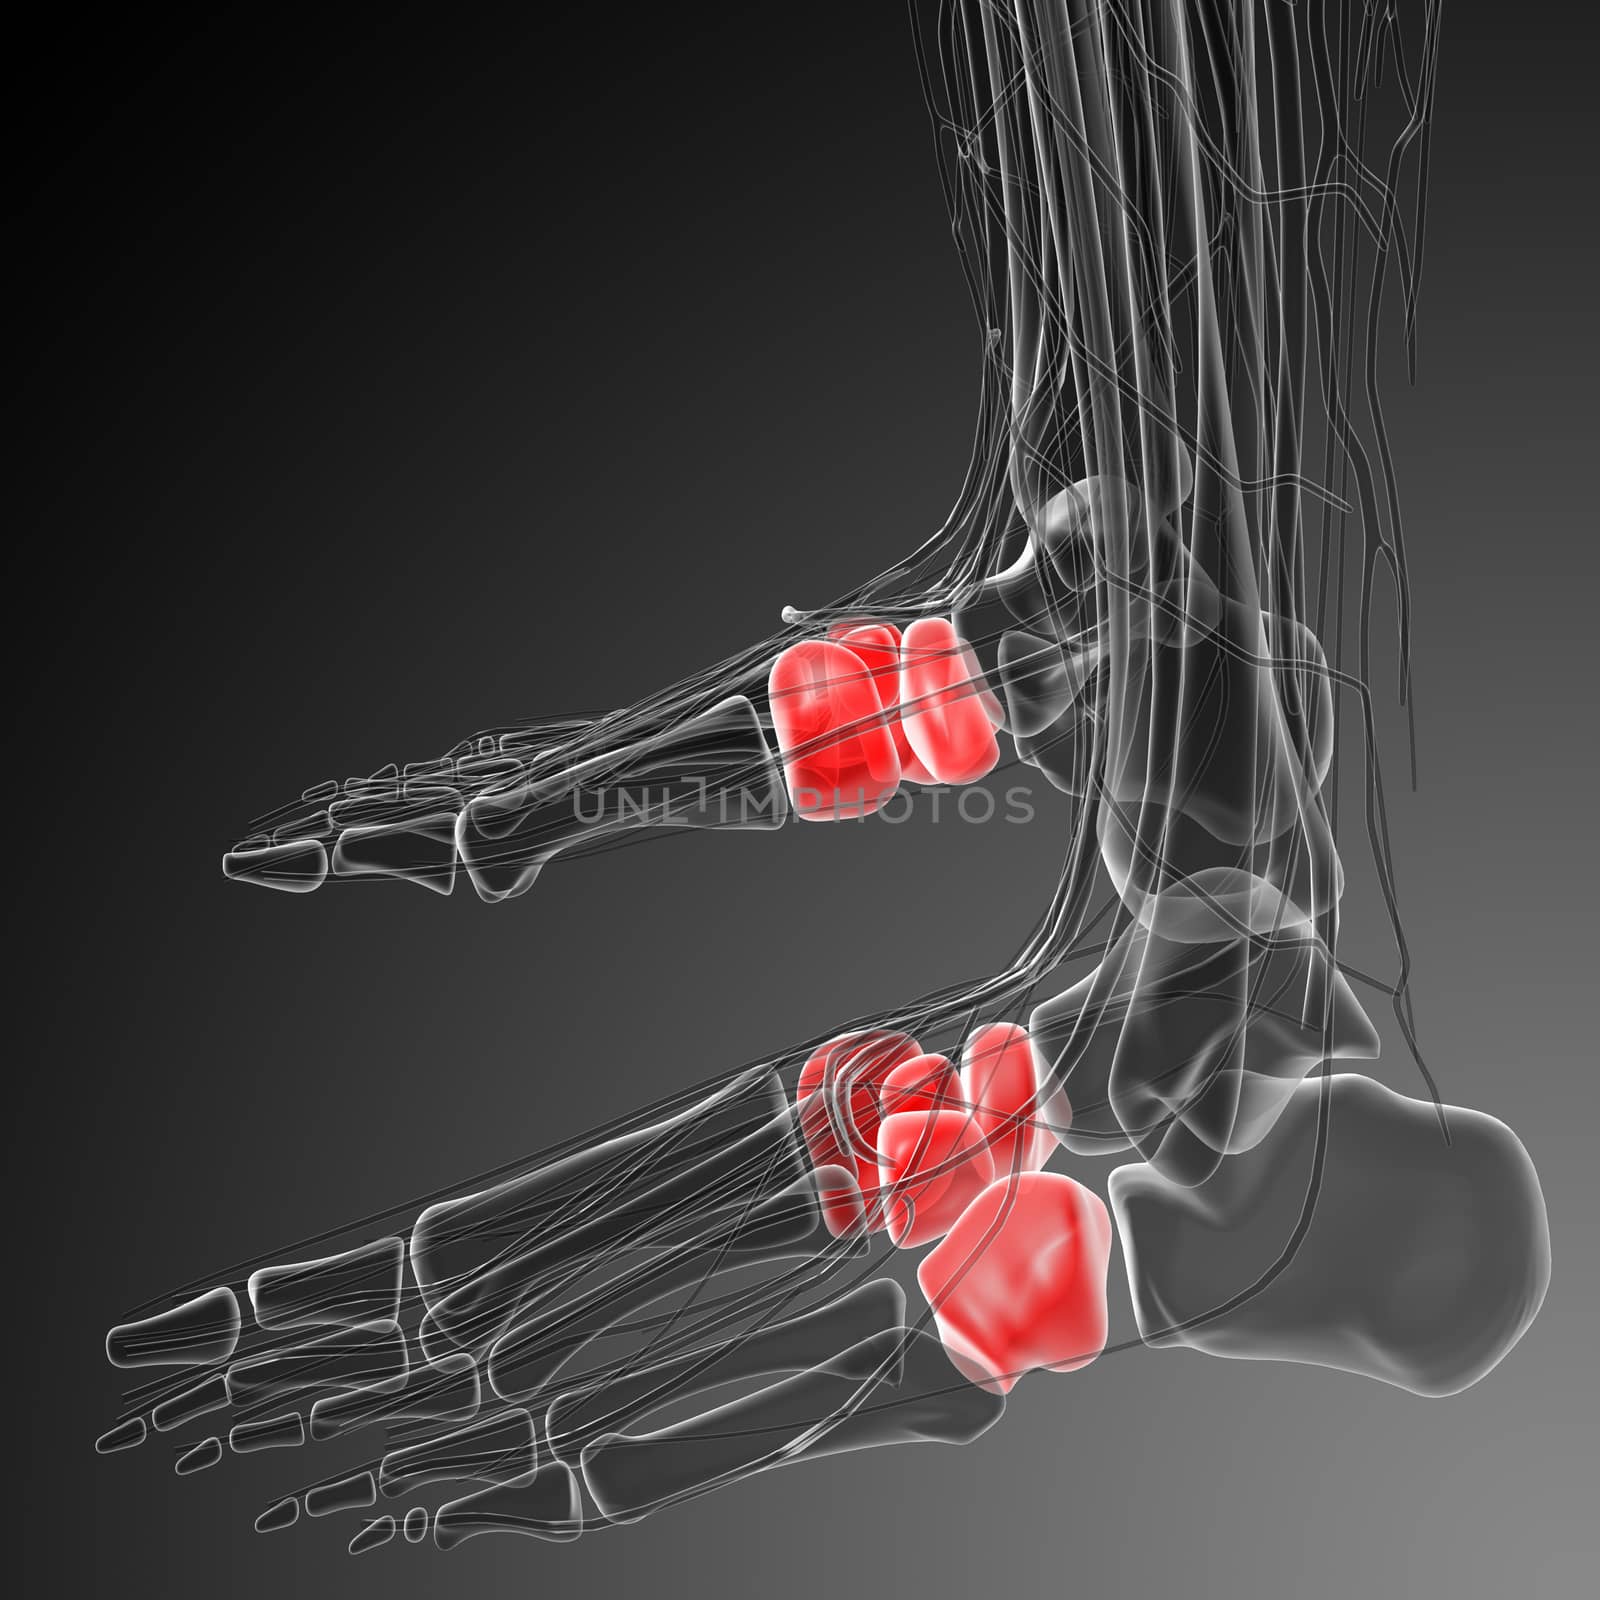 3d render medical illustration of the midfoot bone  by maya2008